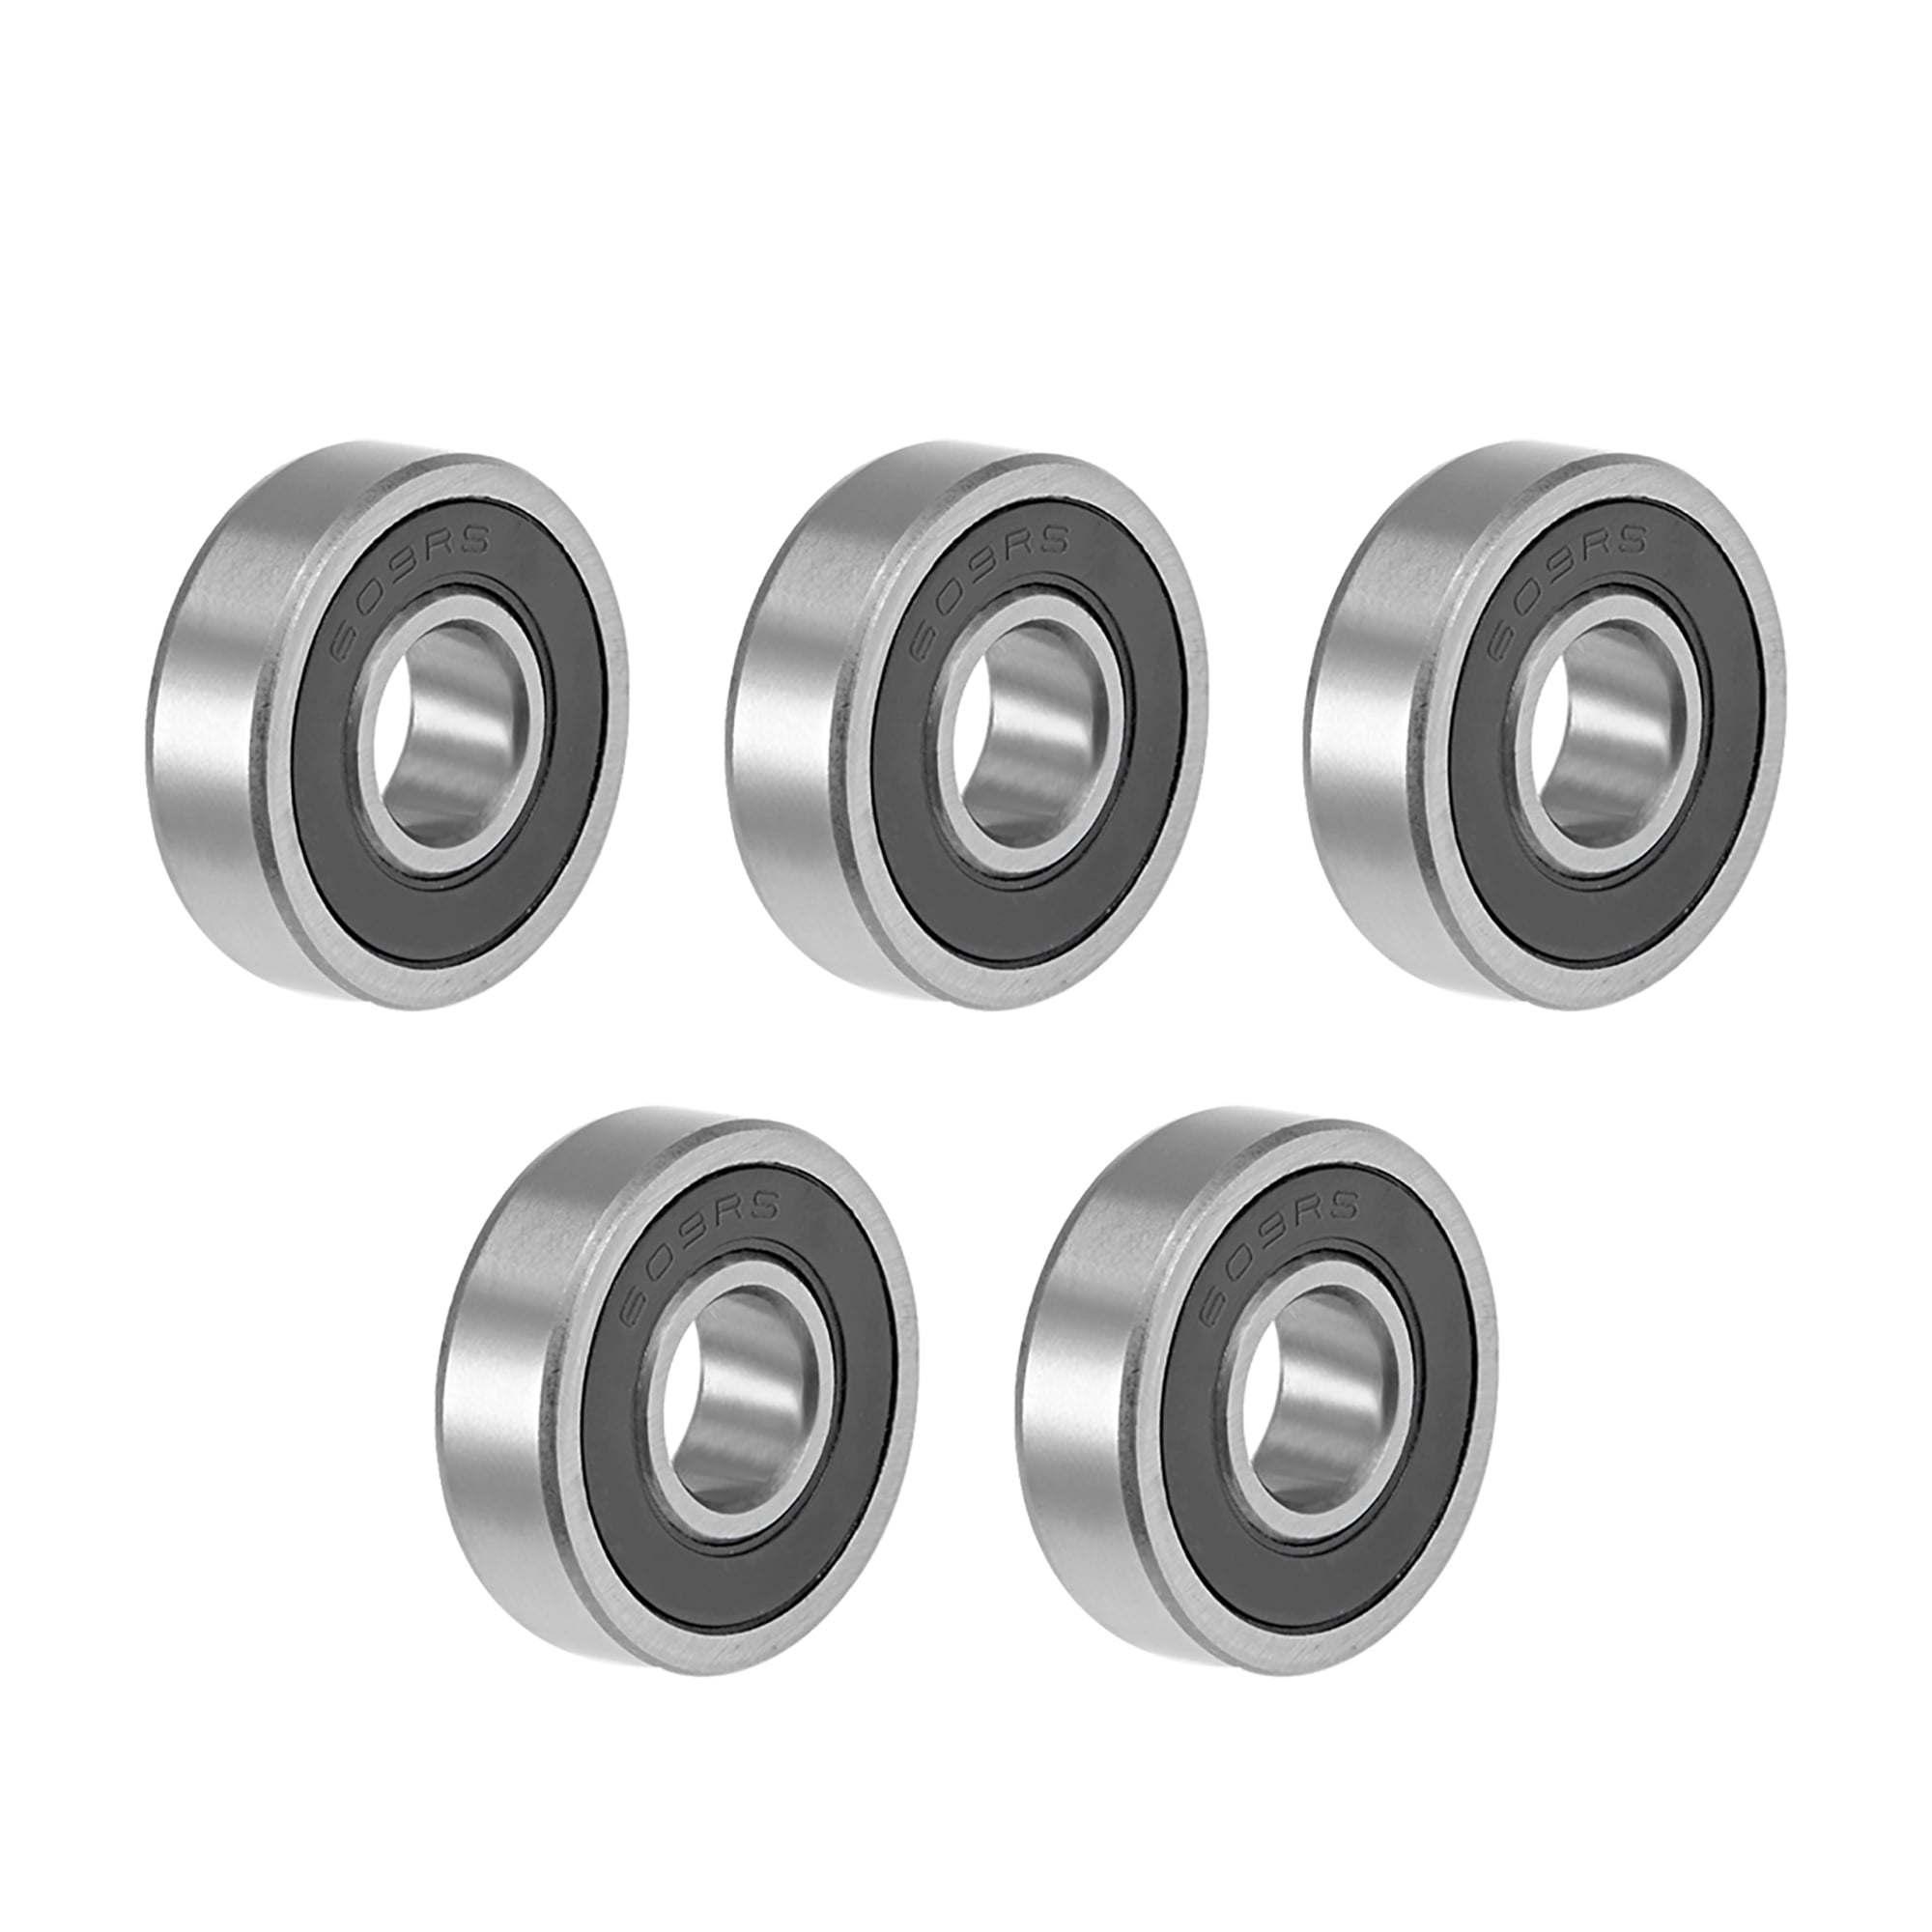 10x 606-2RS Ball Bearing 6mm x 17mm x 6mm Rubber Seal Premium RS 2RS Shielded 